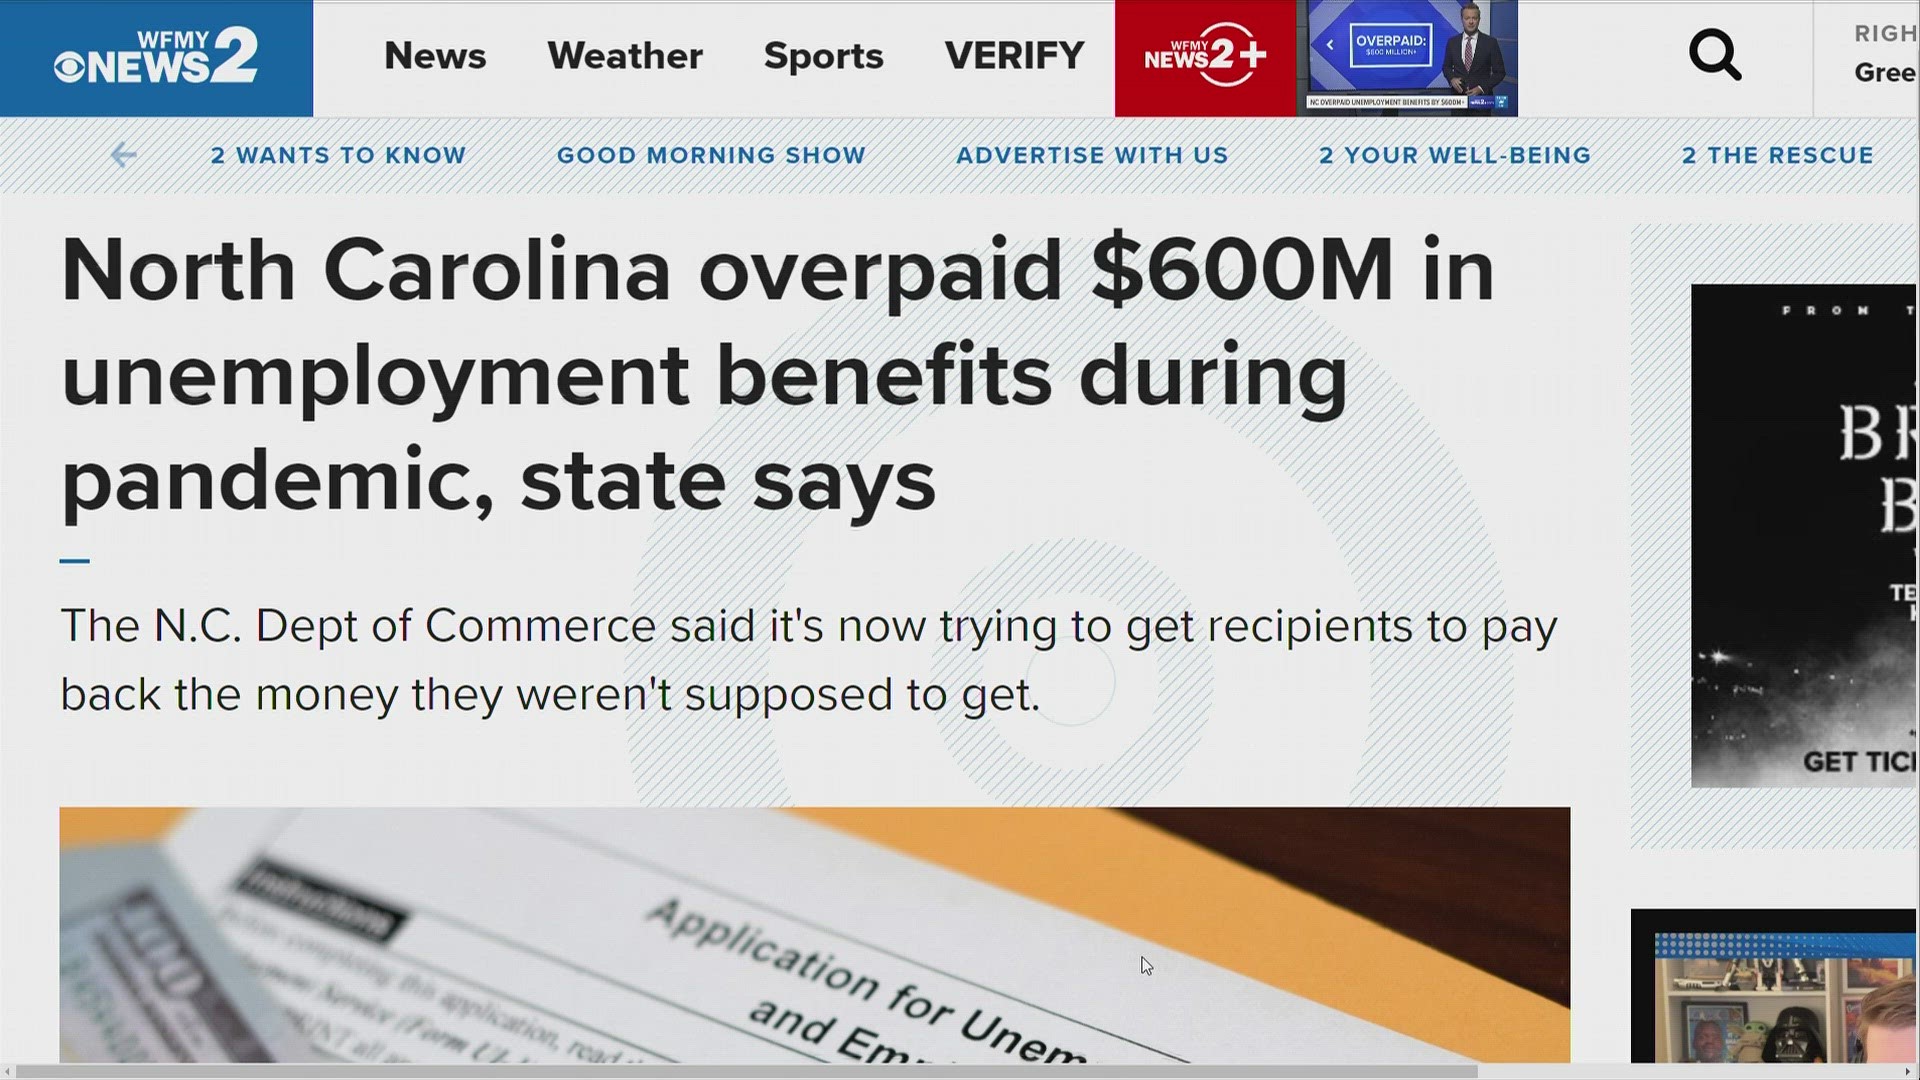 The state is now trying to recoup more than half a billion dollars.